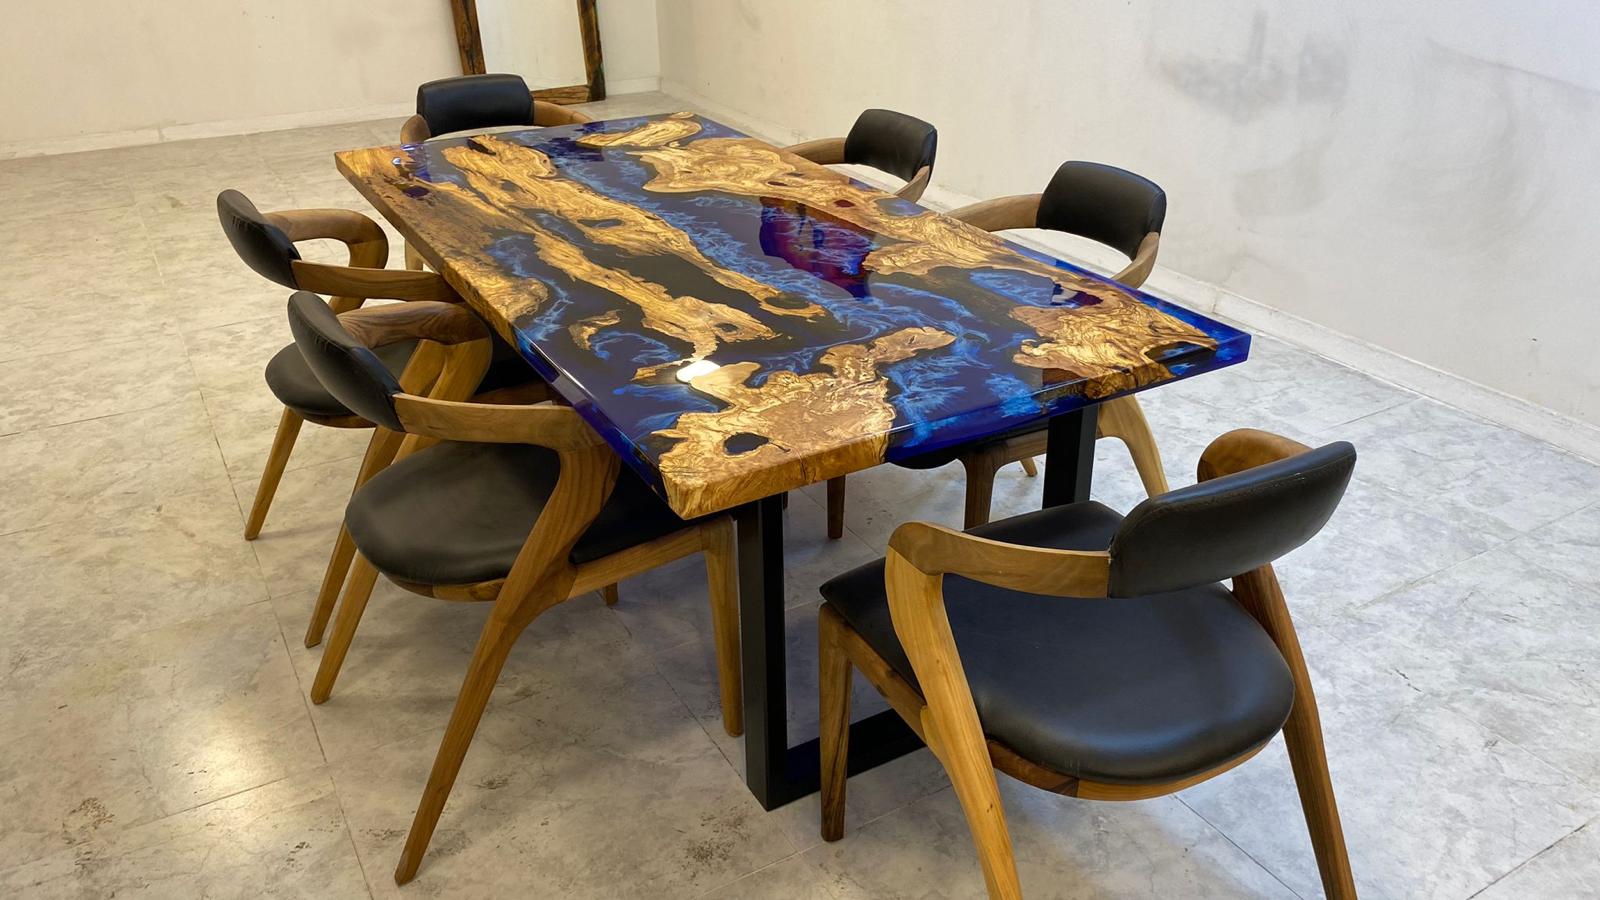 Olive Wood Sea Design Blue Epoxy Table – Dining Table – River Table – Resin  Table – Ories Wood